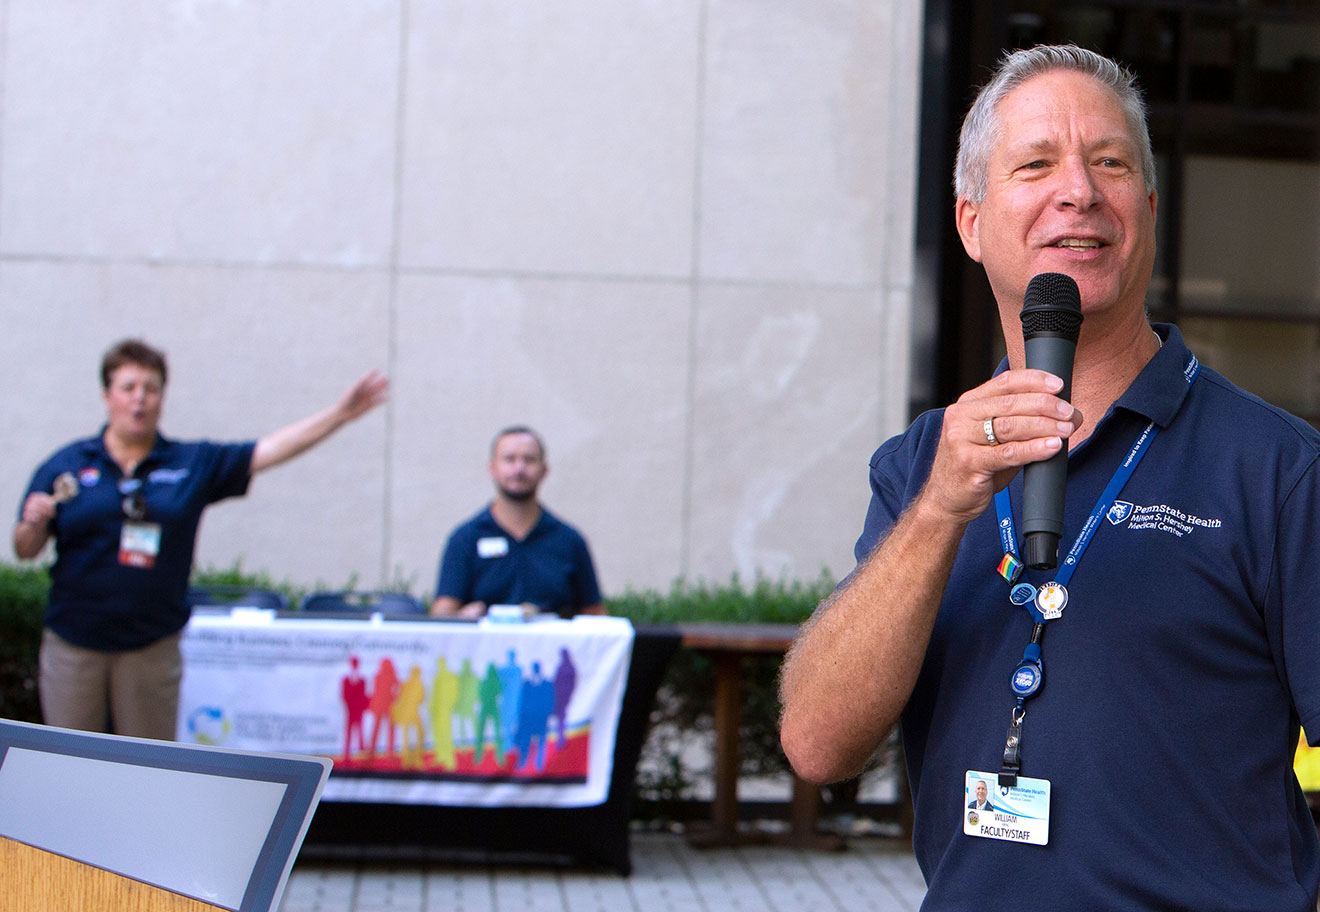 A man speaks into a microphone at an outdoor event. Two people are seen in the background at a table of LGBTQ+ information.